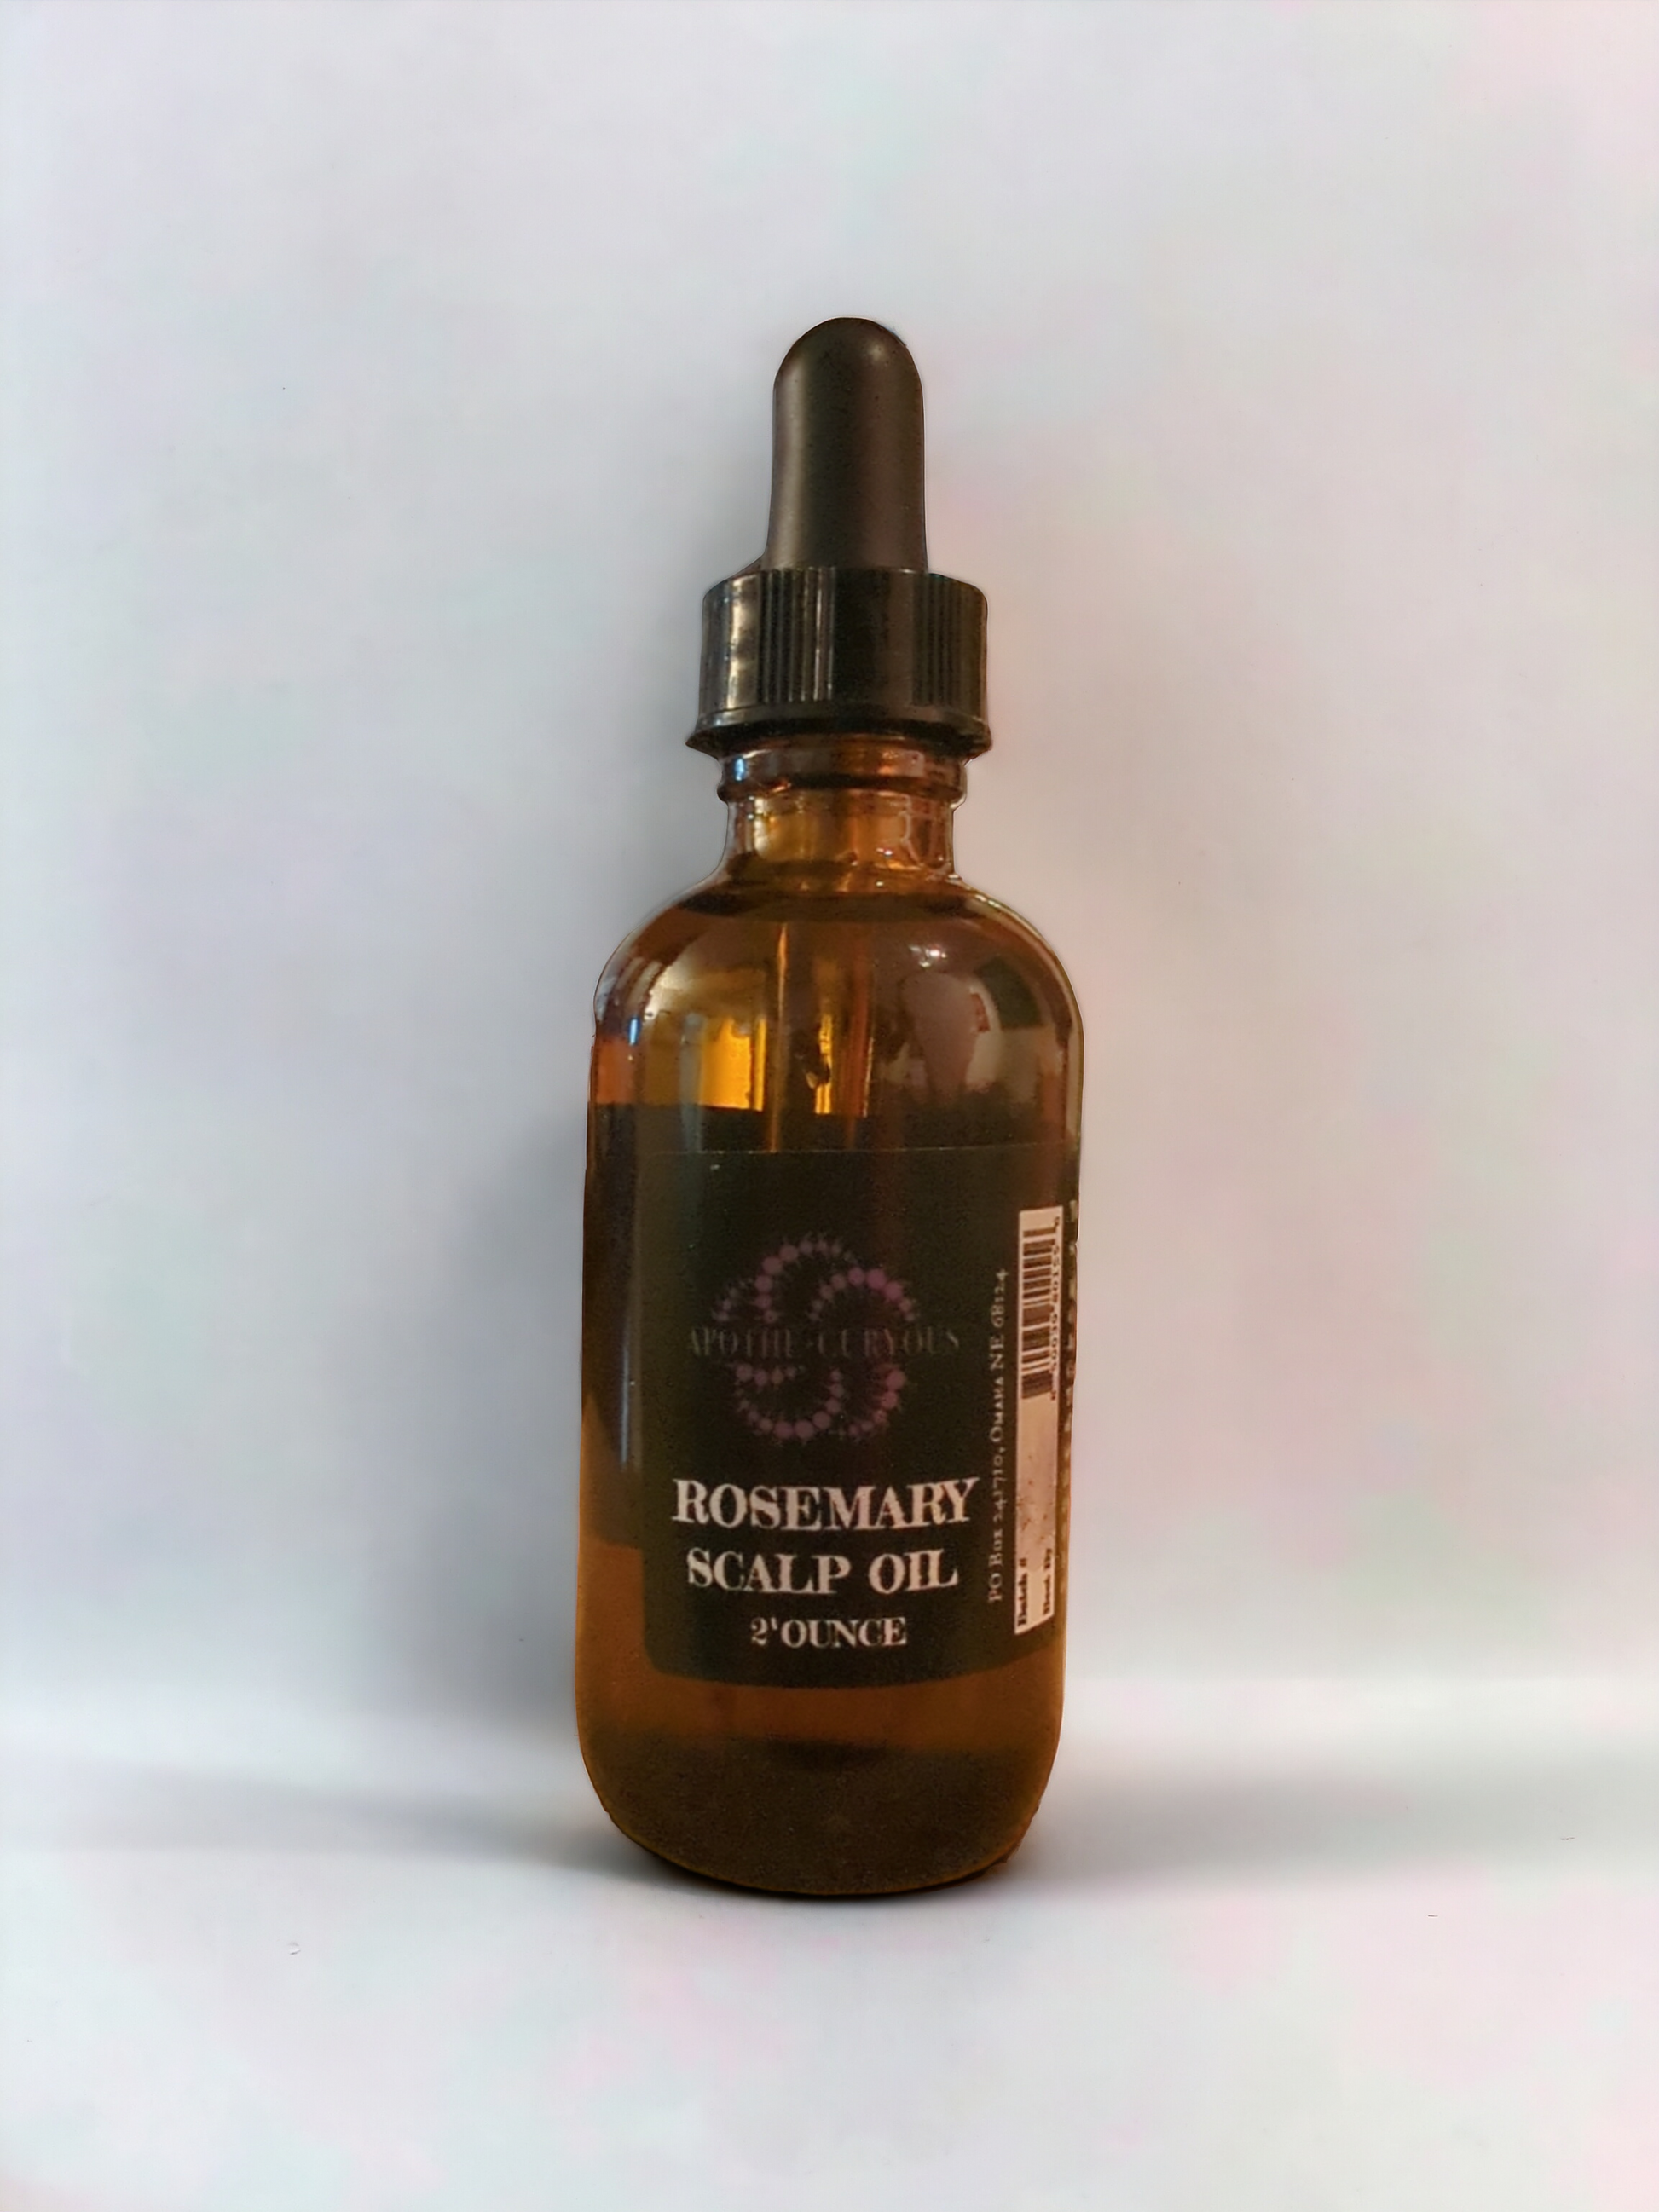 Rosemary Scalp oil, 2 ounce glass bottle with dropper top, Apothecuryous